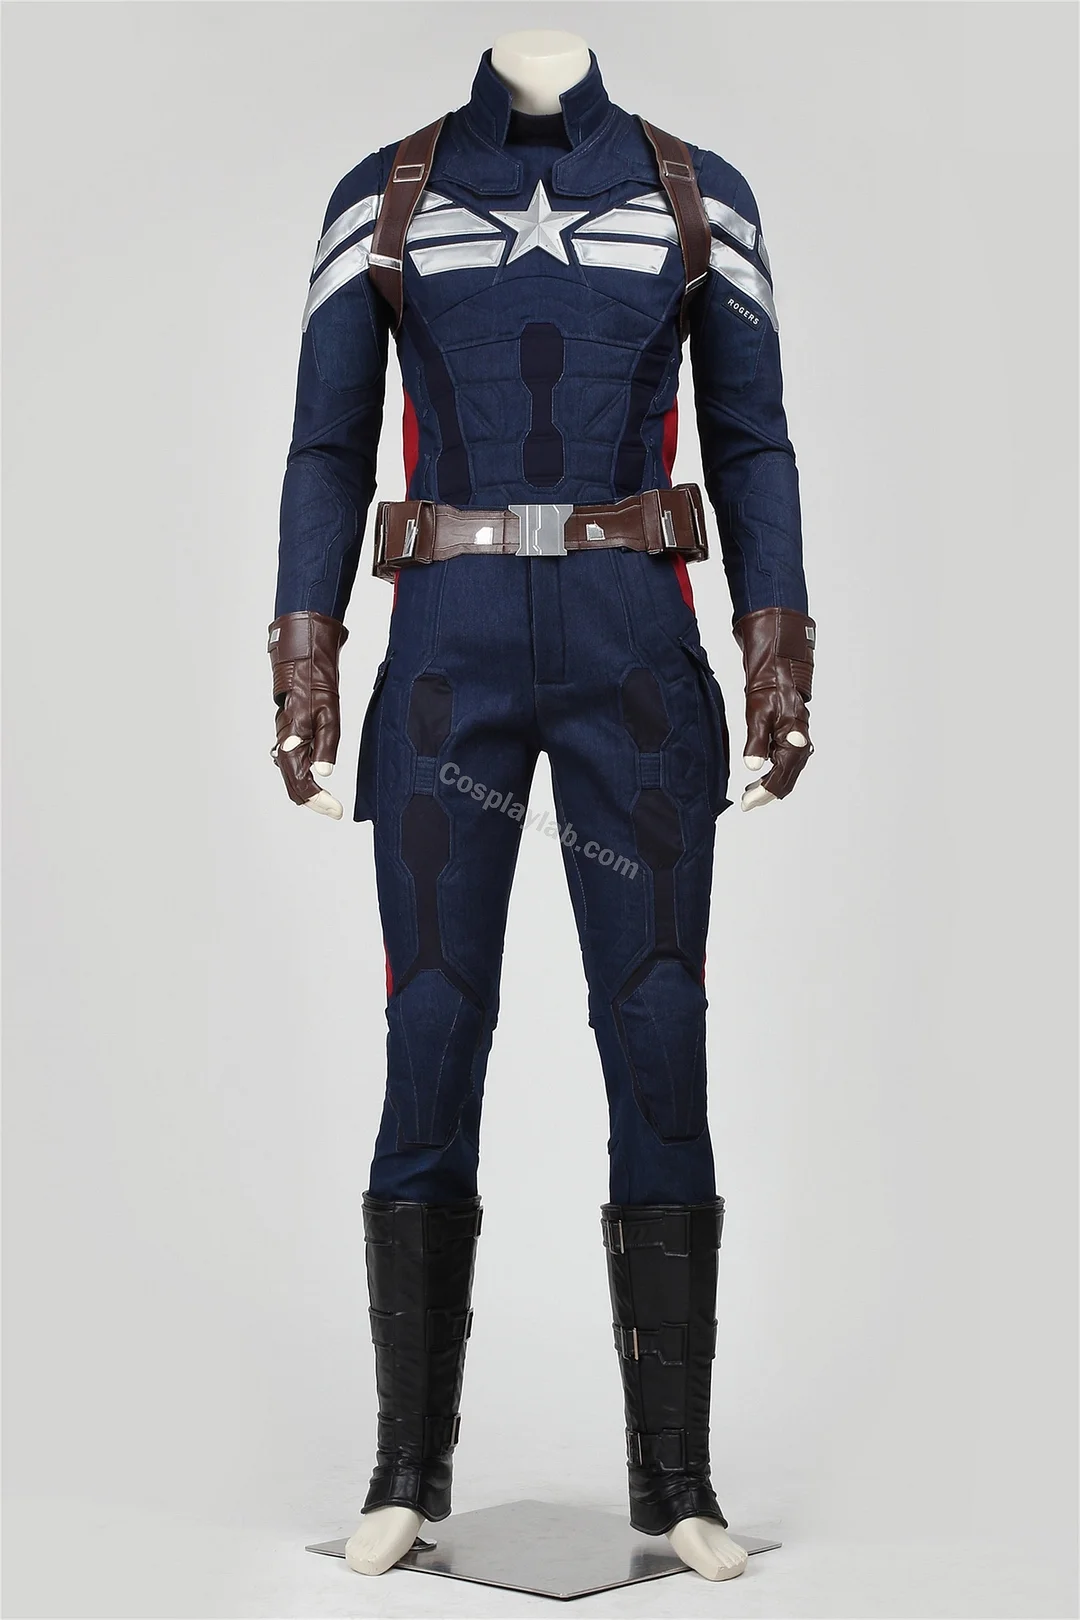 Captain America 2 Captain America Cosplay Steve Rogers Costume Top Level By CosplayLab